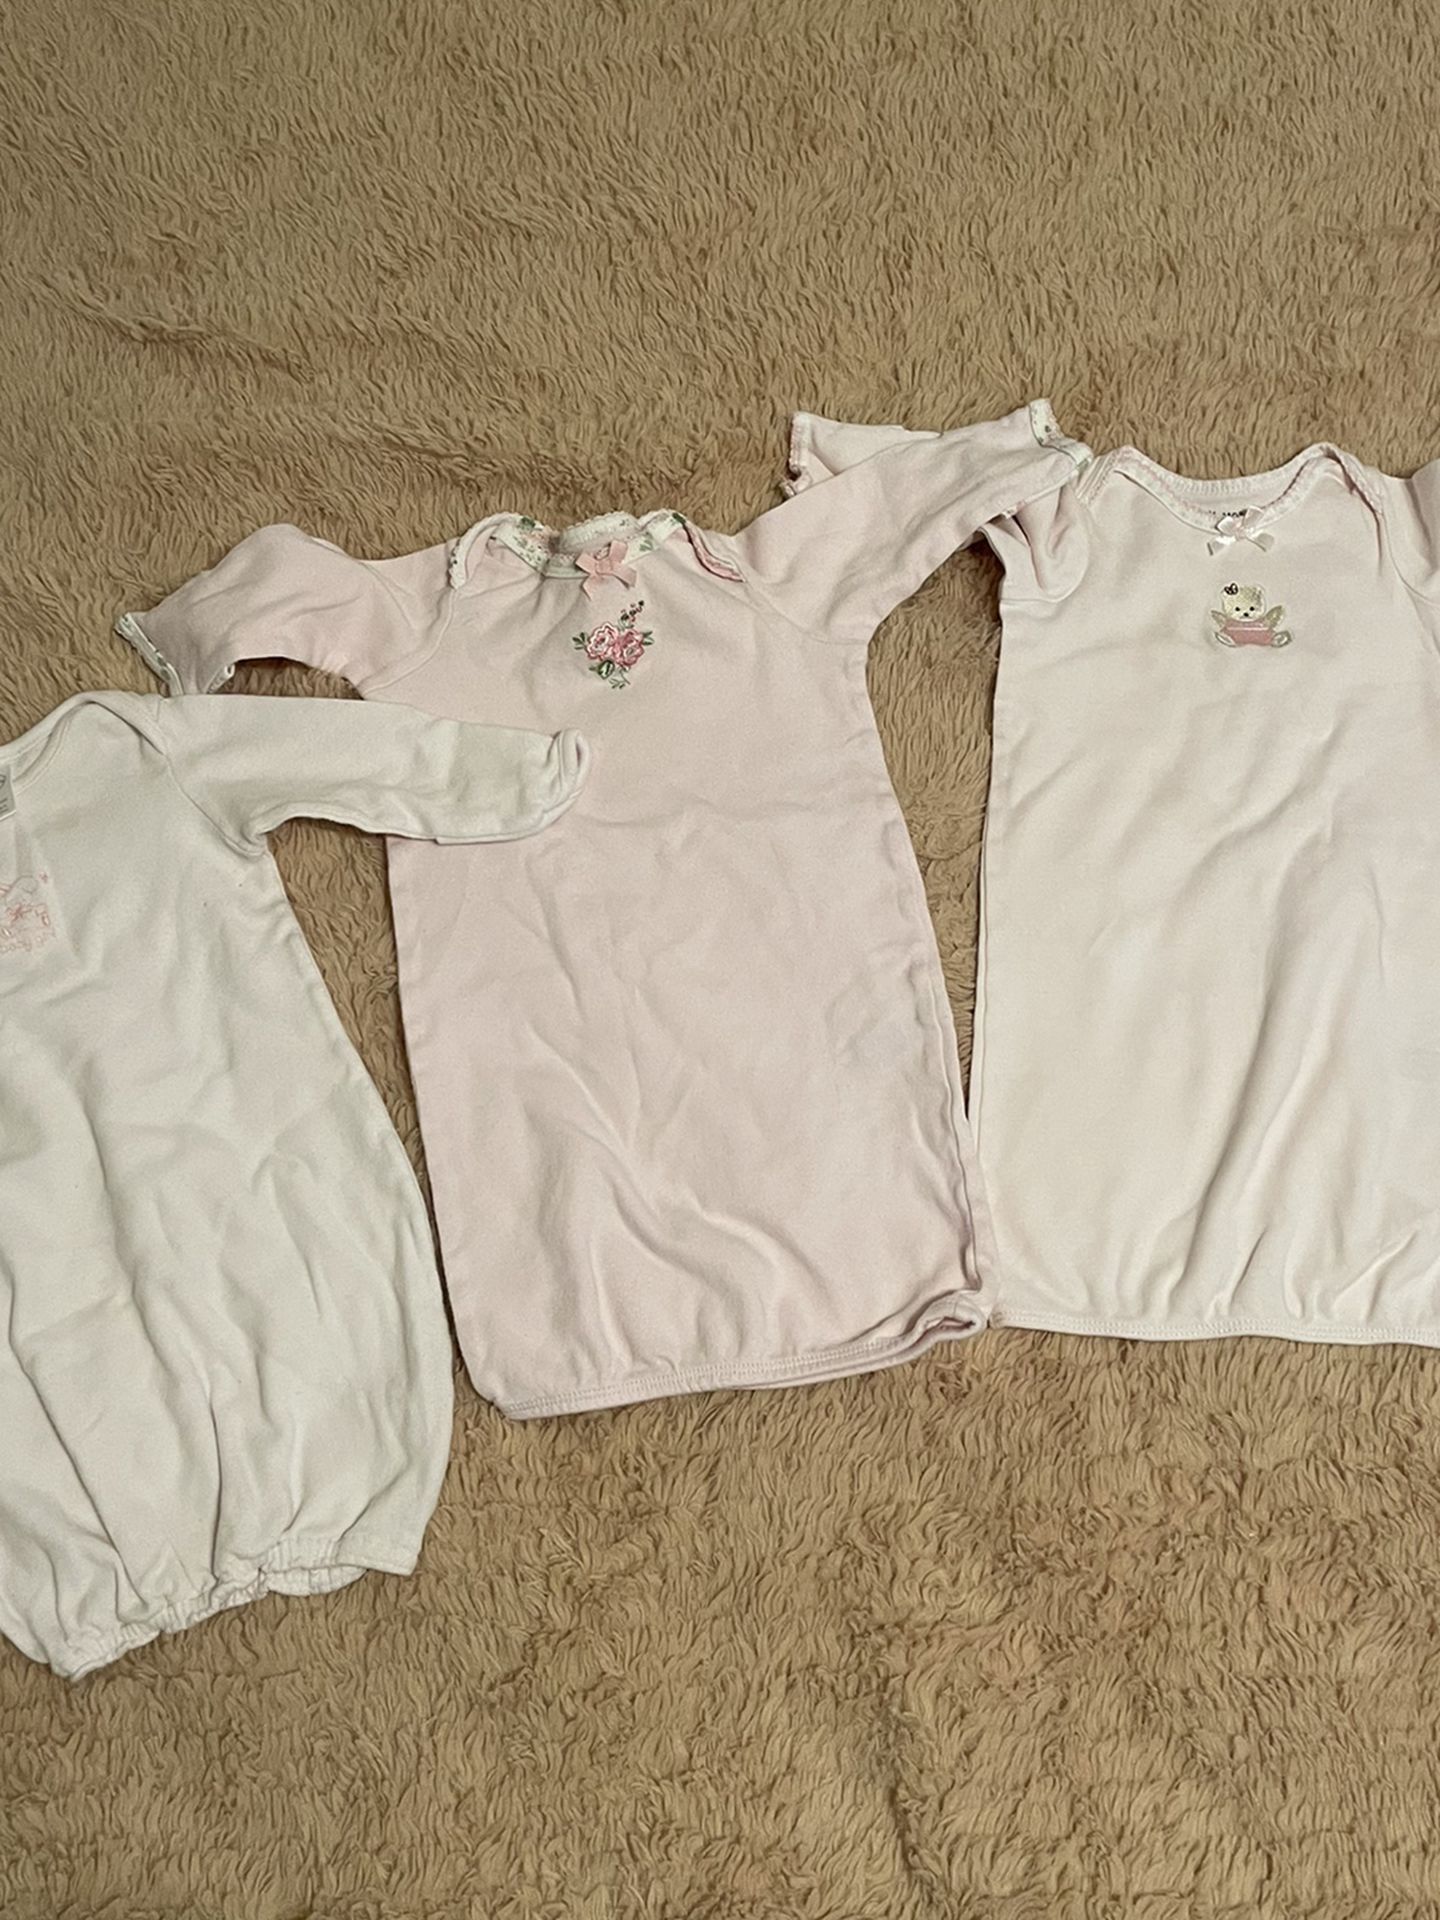 0-3 Month Sleeper Gowns